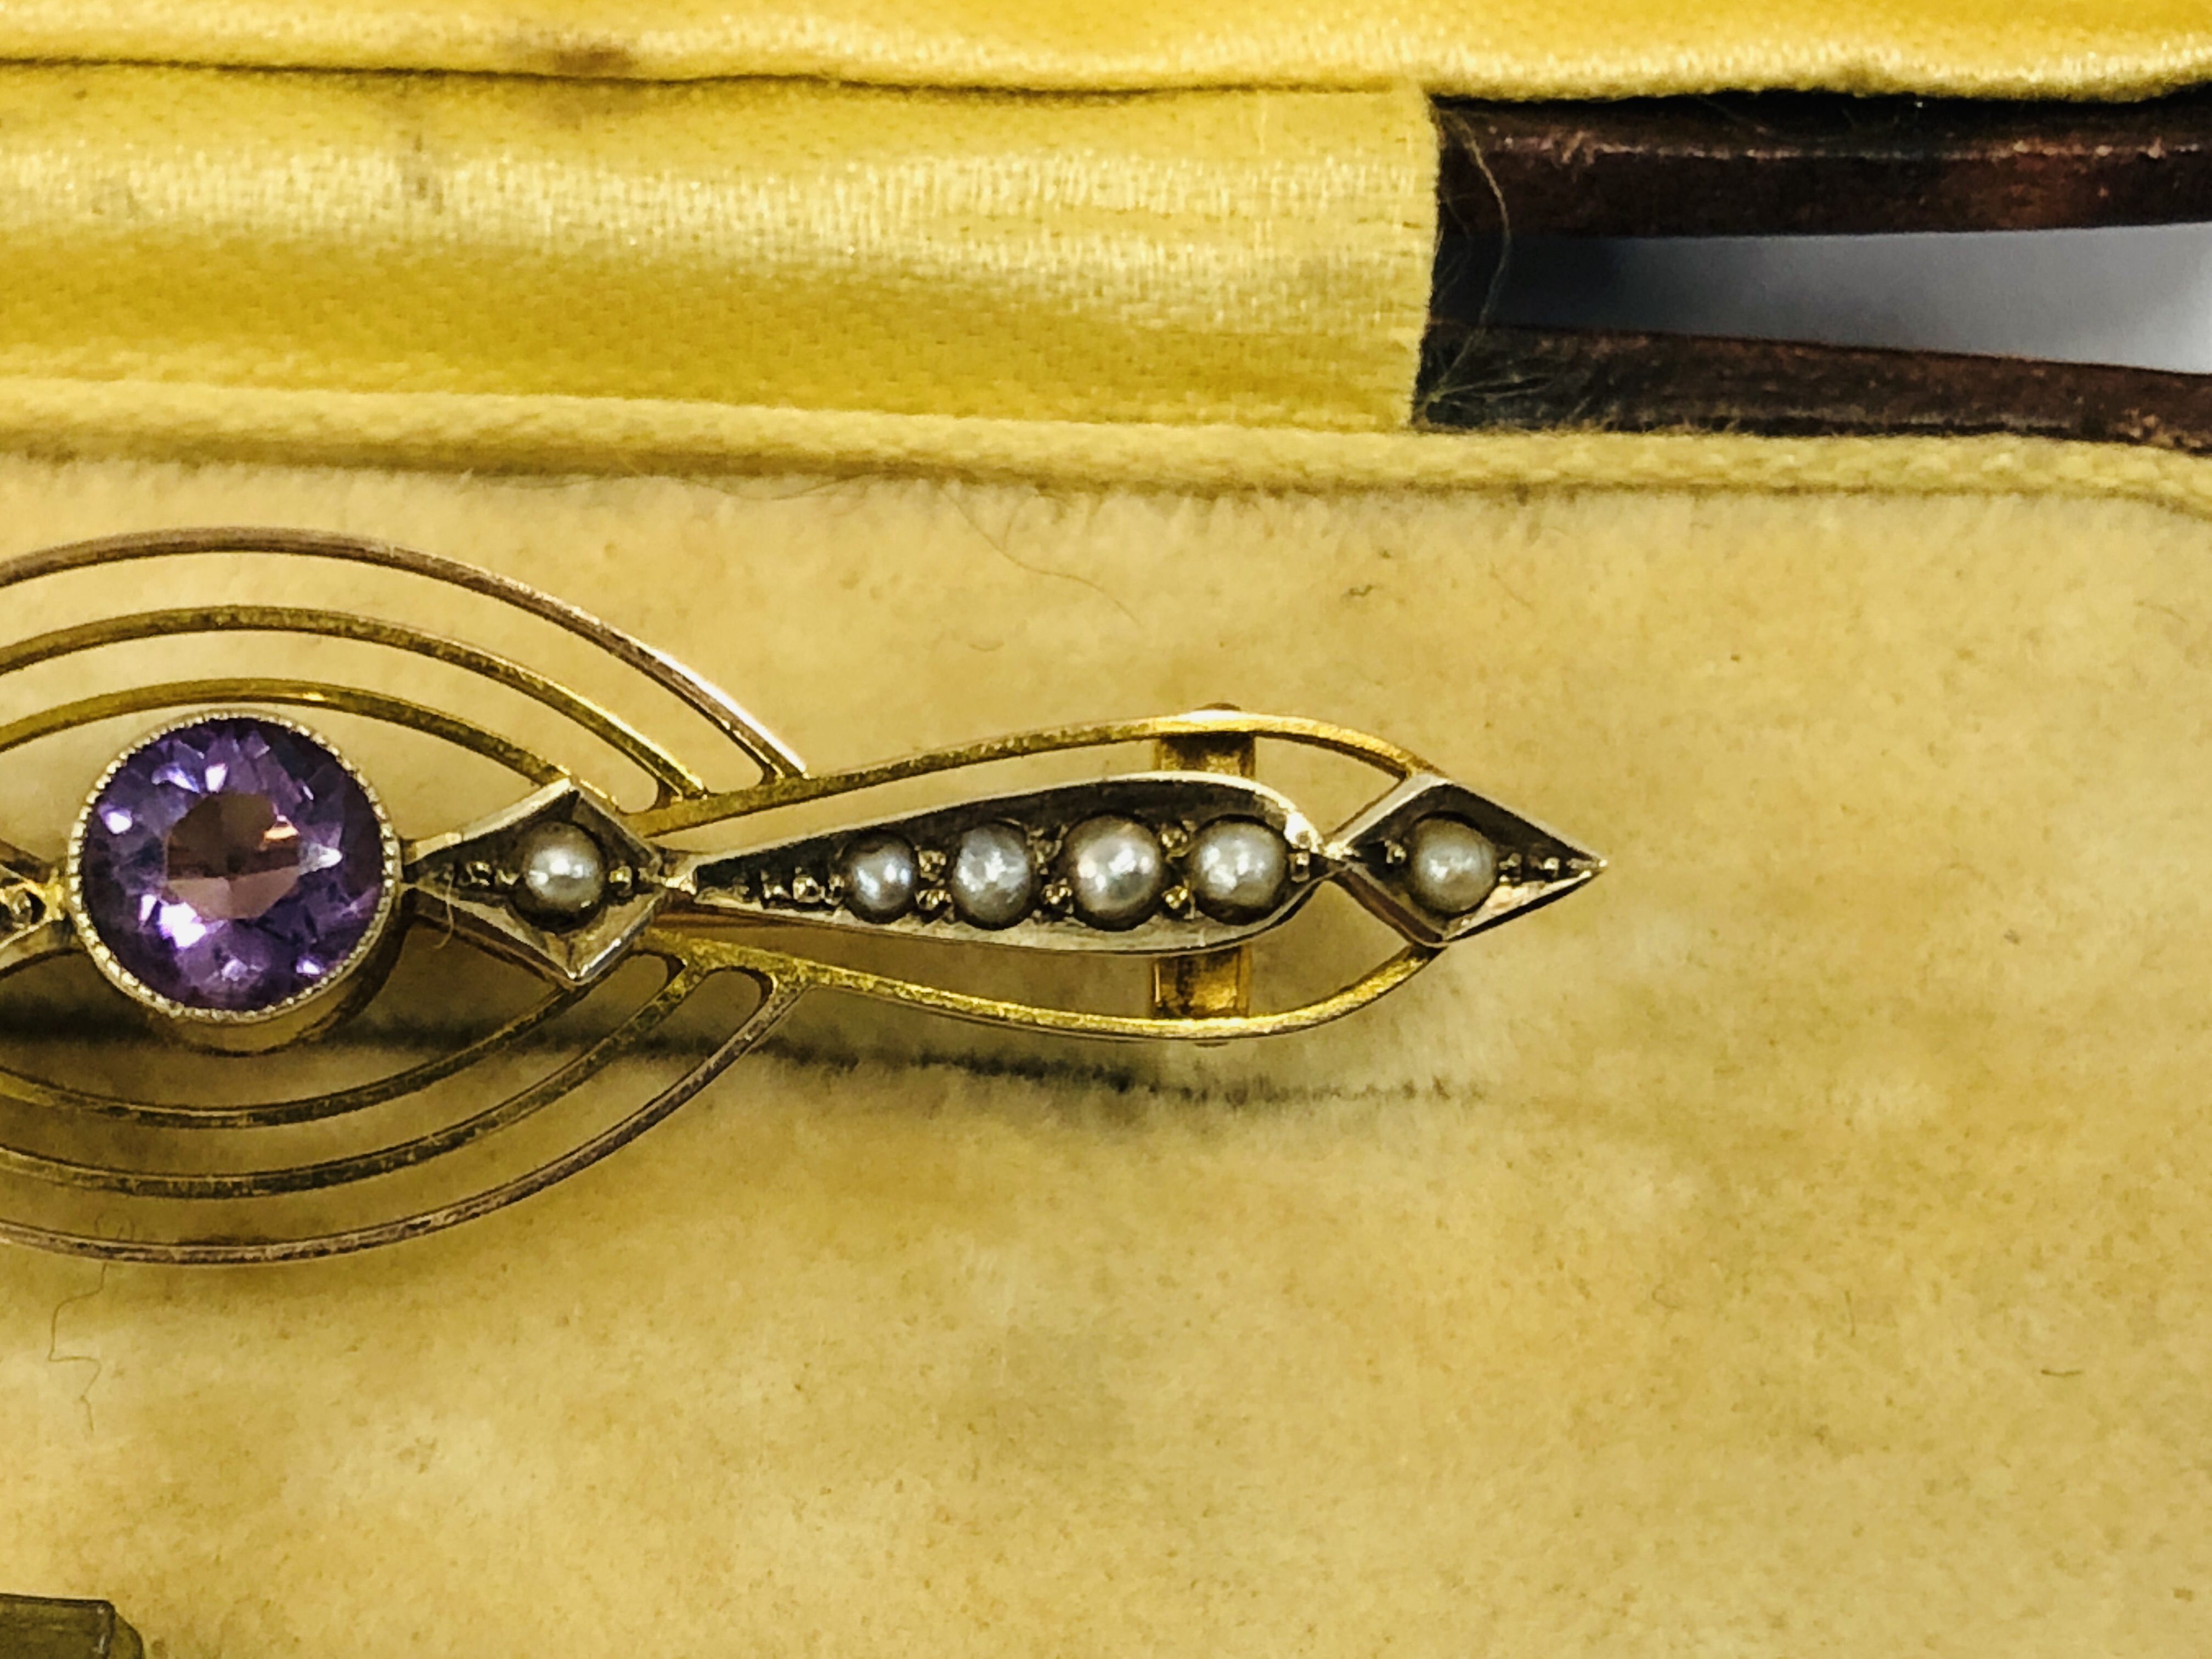 A VINTAGE 9CT BROOCH / PENDANT SET WITH CENTRAL AMETHYST AND SEED PEARLS IN A VINTAGE BOX MARKED - Image 5 of 6